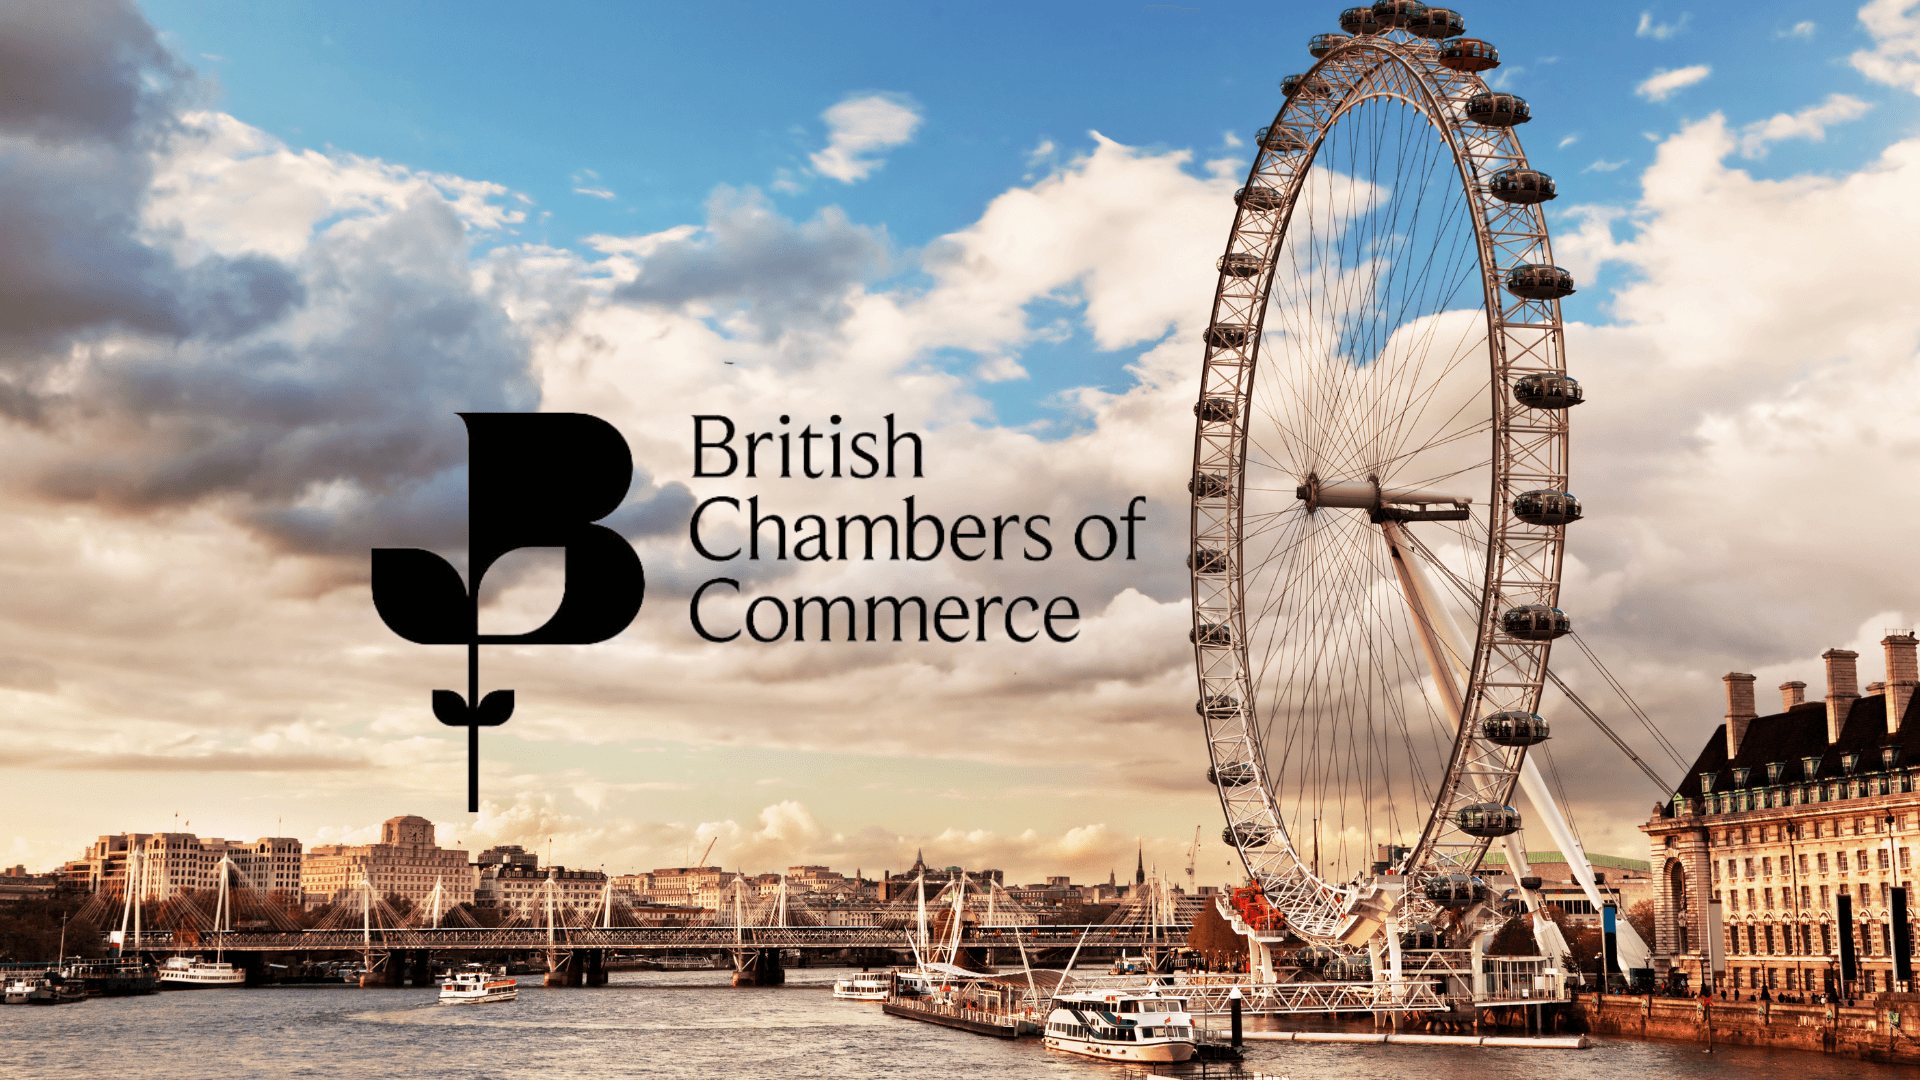 ChamberCustoms By The British Chambers of Commerce Navigates Businesses Through Post-Brexit Cross-Border Trade  1.png